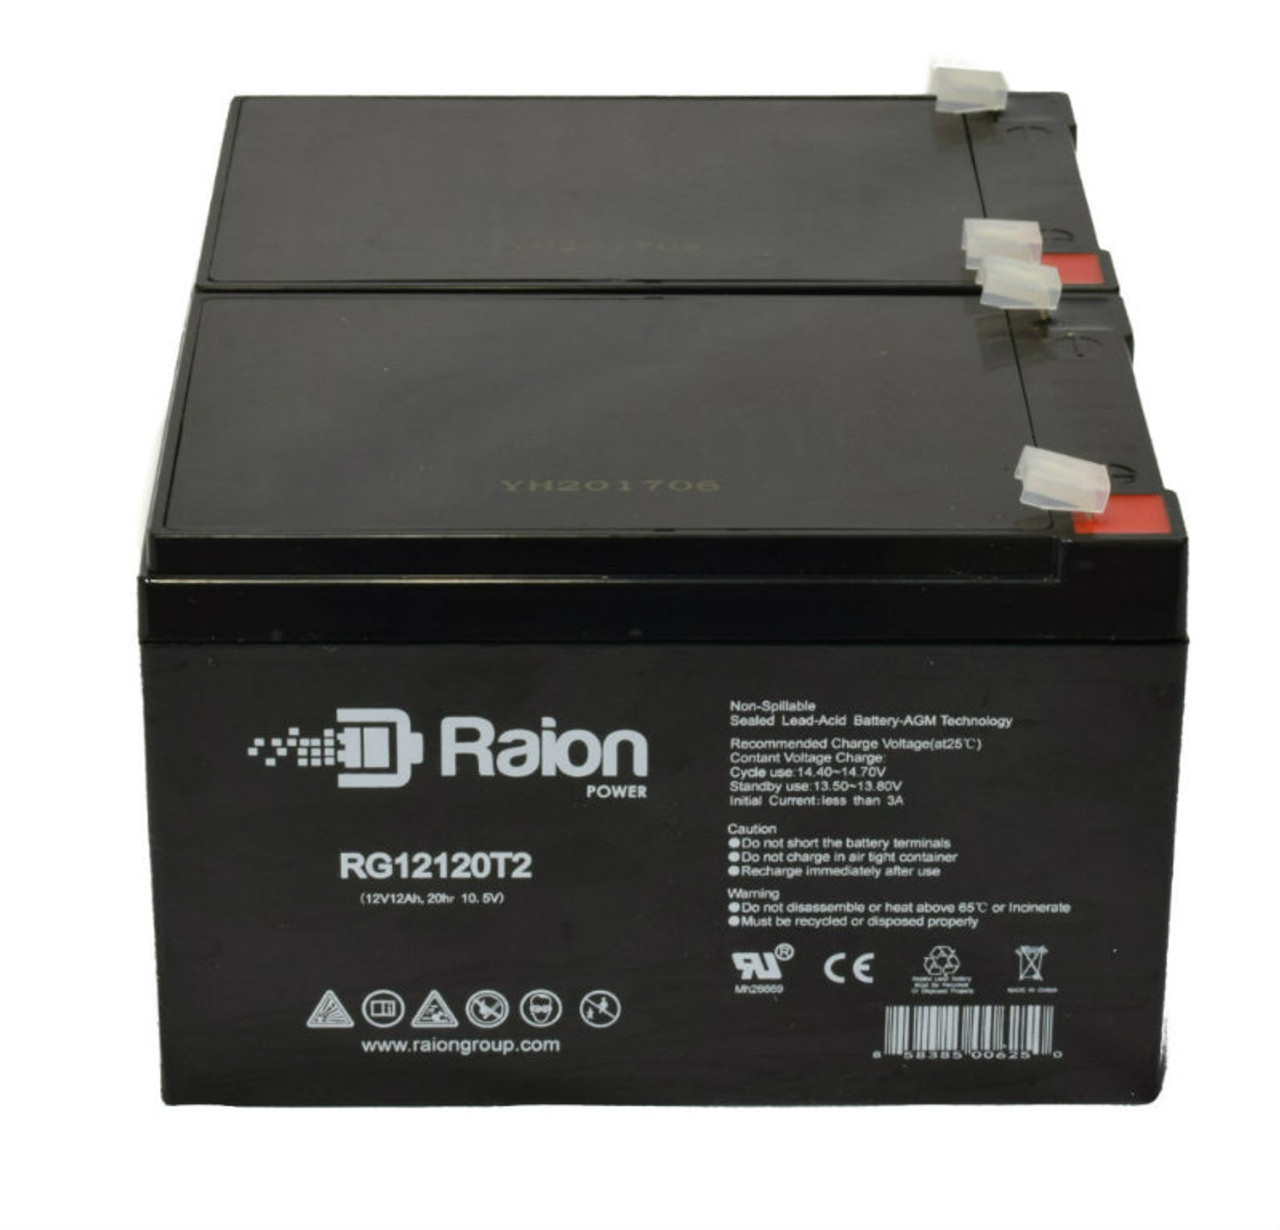 Raion Power RG12120T2 Replacement Fire Alarm Control Panel Battery for Altronix AL1024ULACMJ - 2 Pack